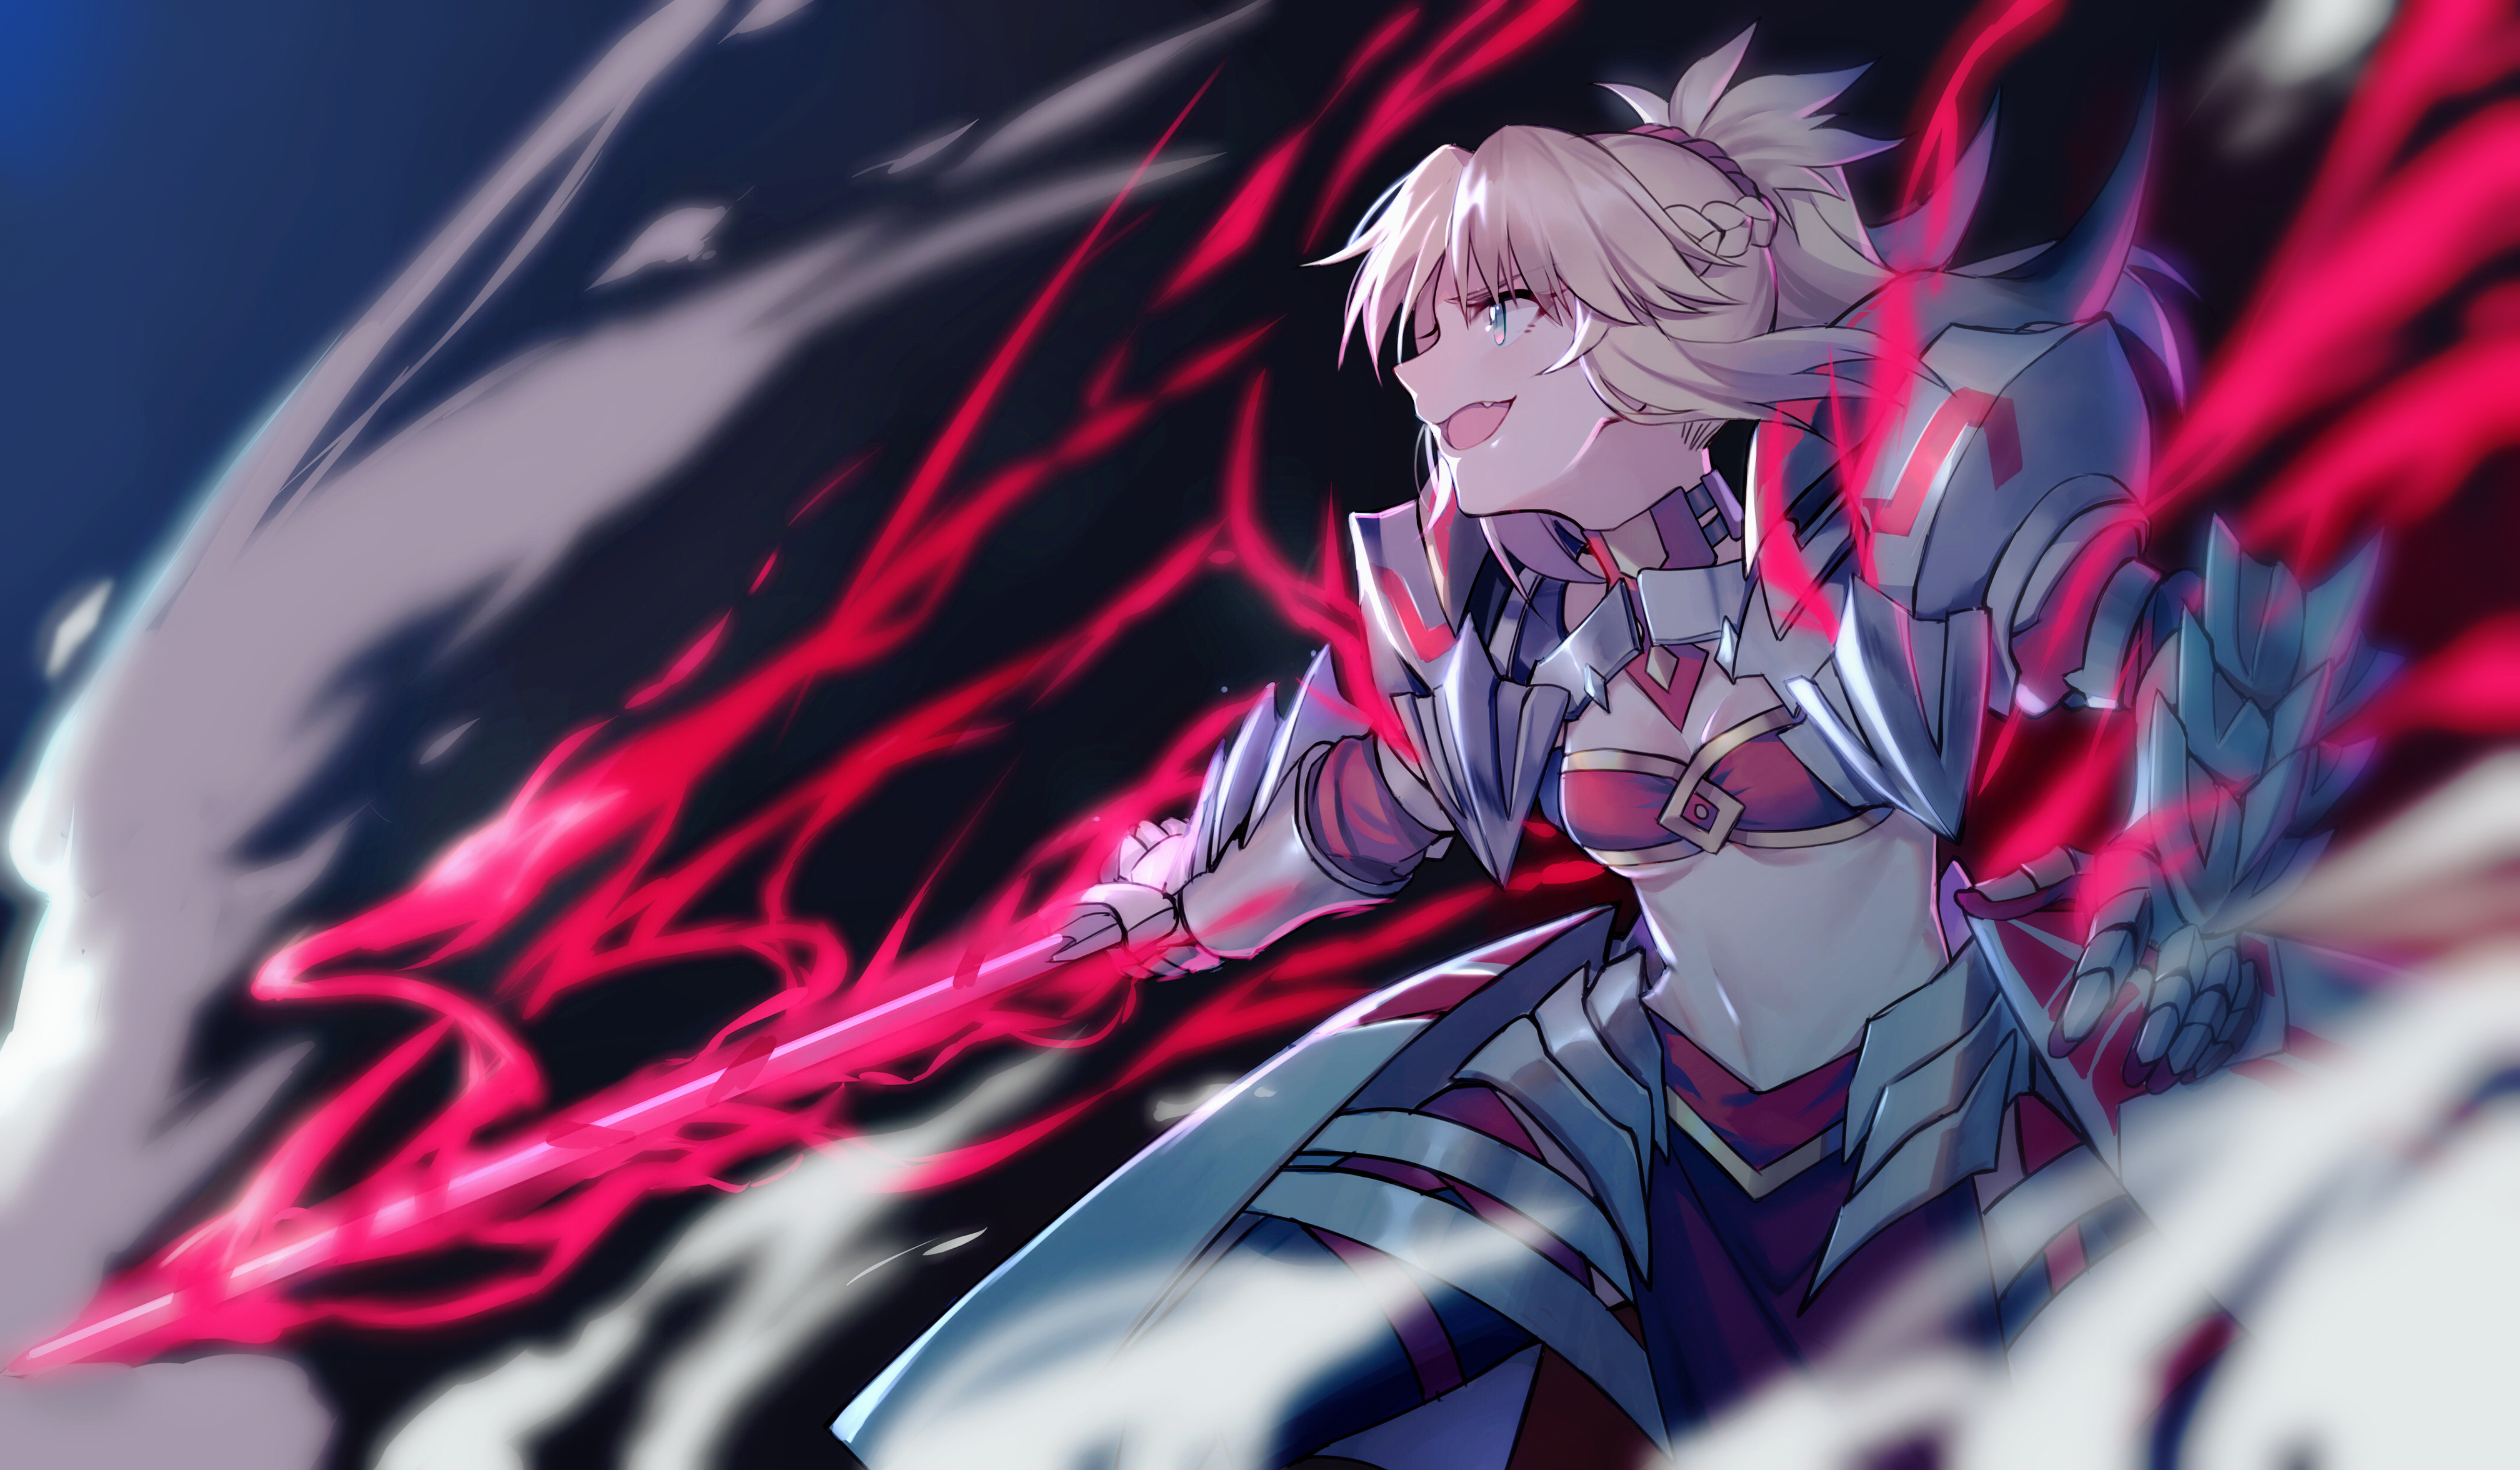 Fate Series FGO Fate Apocrypha Anime Girls Long Hair Women With Swords Blond Hair Armor Ponytail Mor 4032x2352